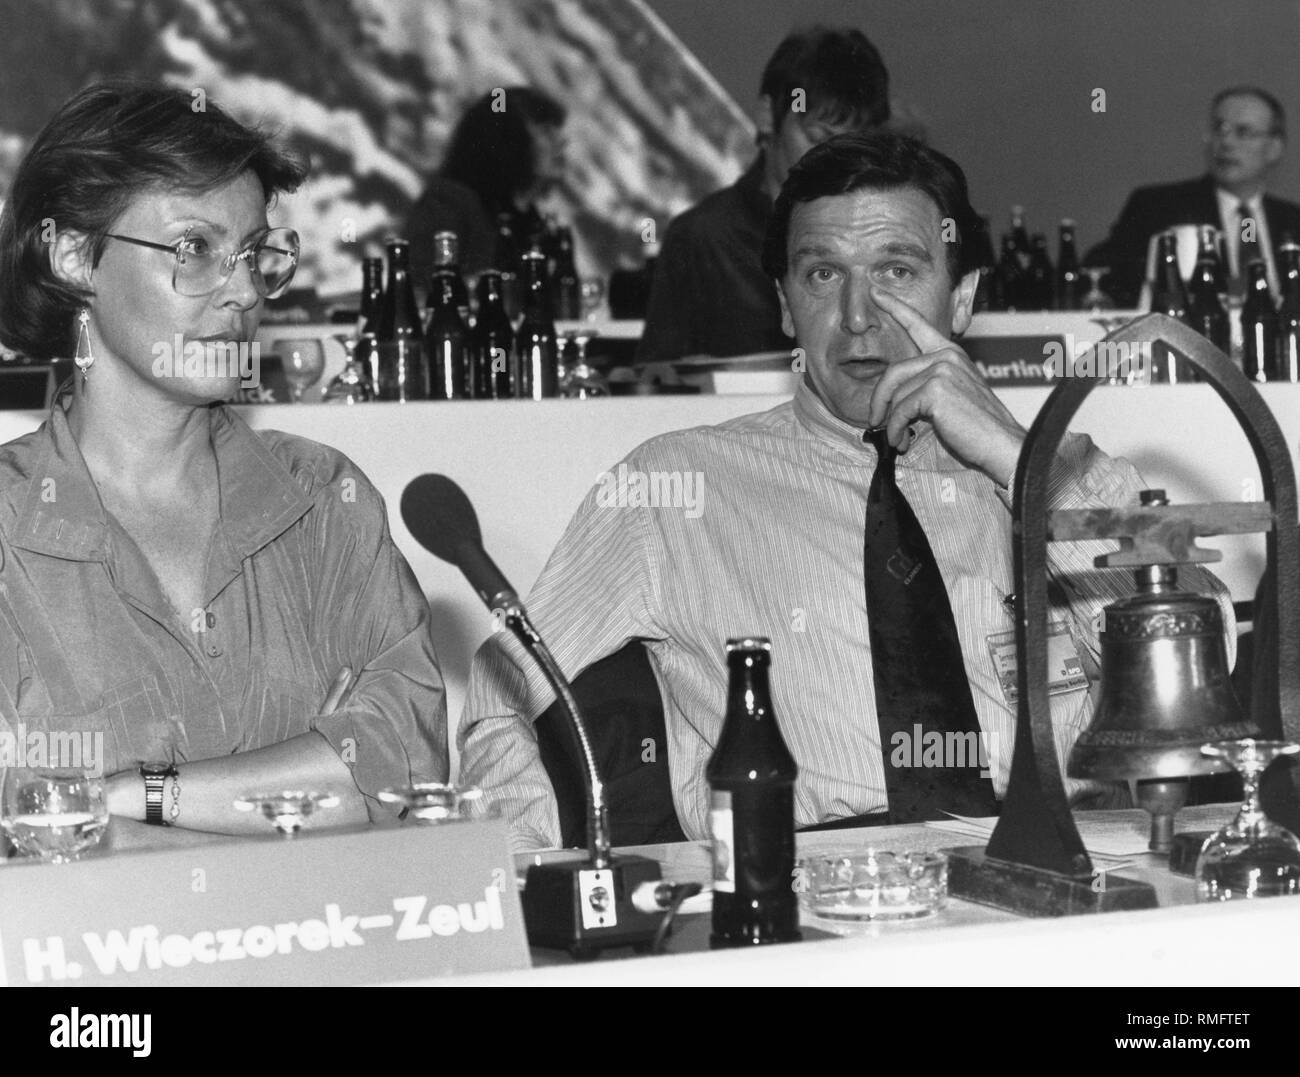 Heidemarie Wieczorek-Zeul and Gerhard Schroeder at the SPD party congress in Berlin. The topics were the new basic program of the SPD and domestic policy of Germany. Stock Photo